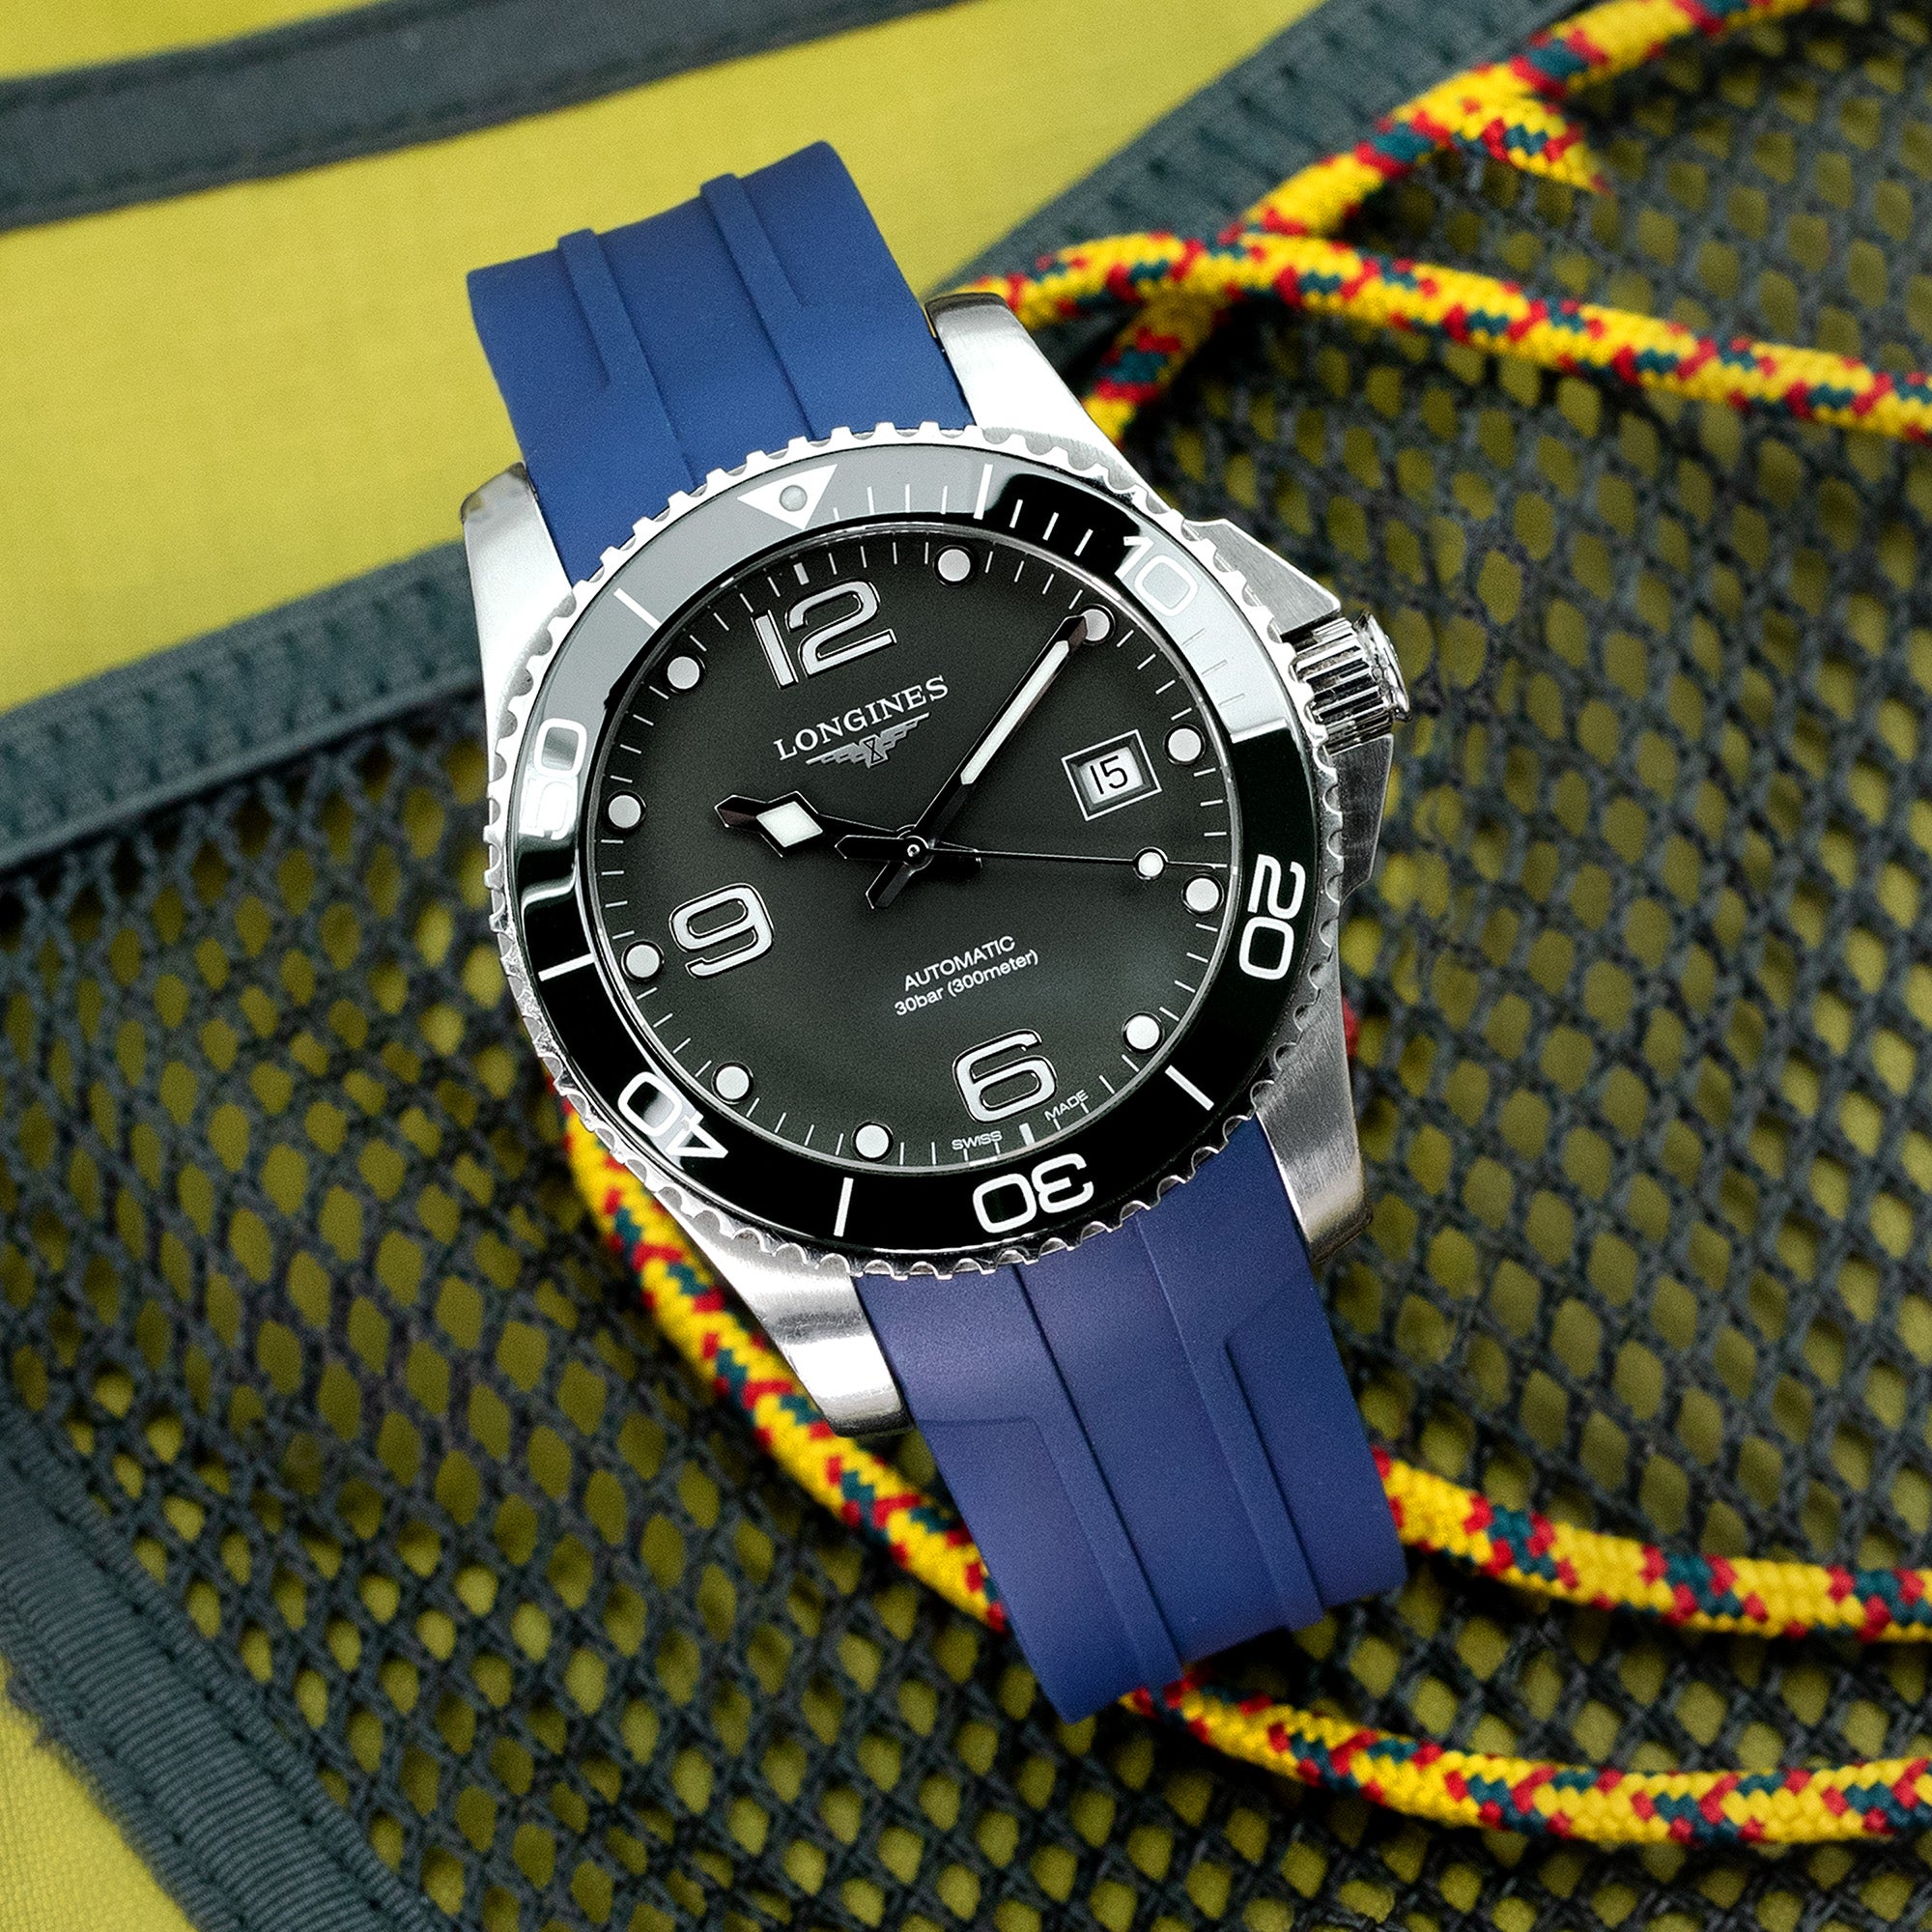 StrapXPro Premium Series - LXH1C Rubber Strap for Longines Hydroconquest Conquest Series Navy Blue Strapcode Watch Bands